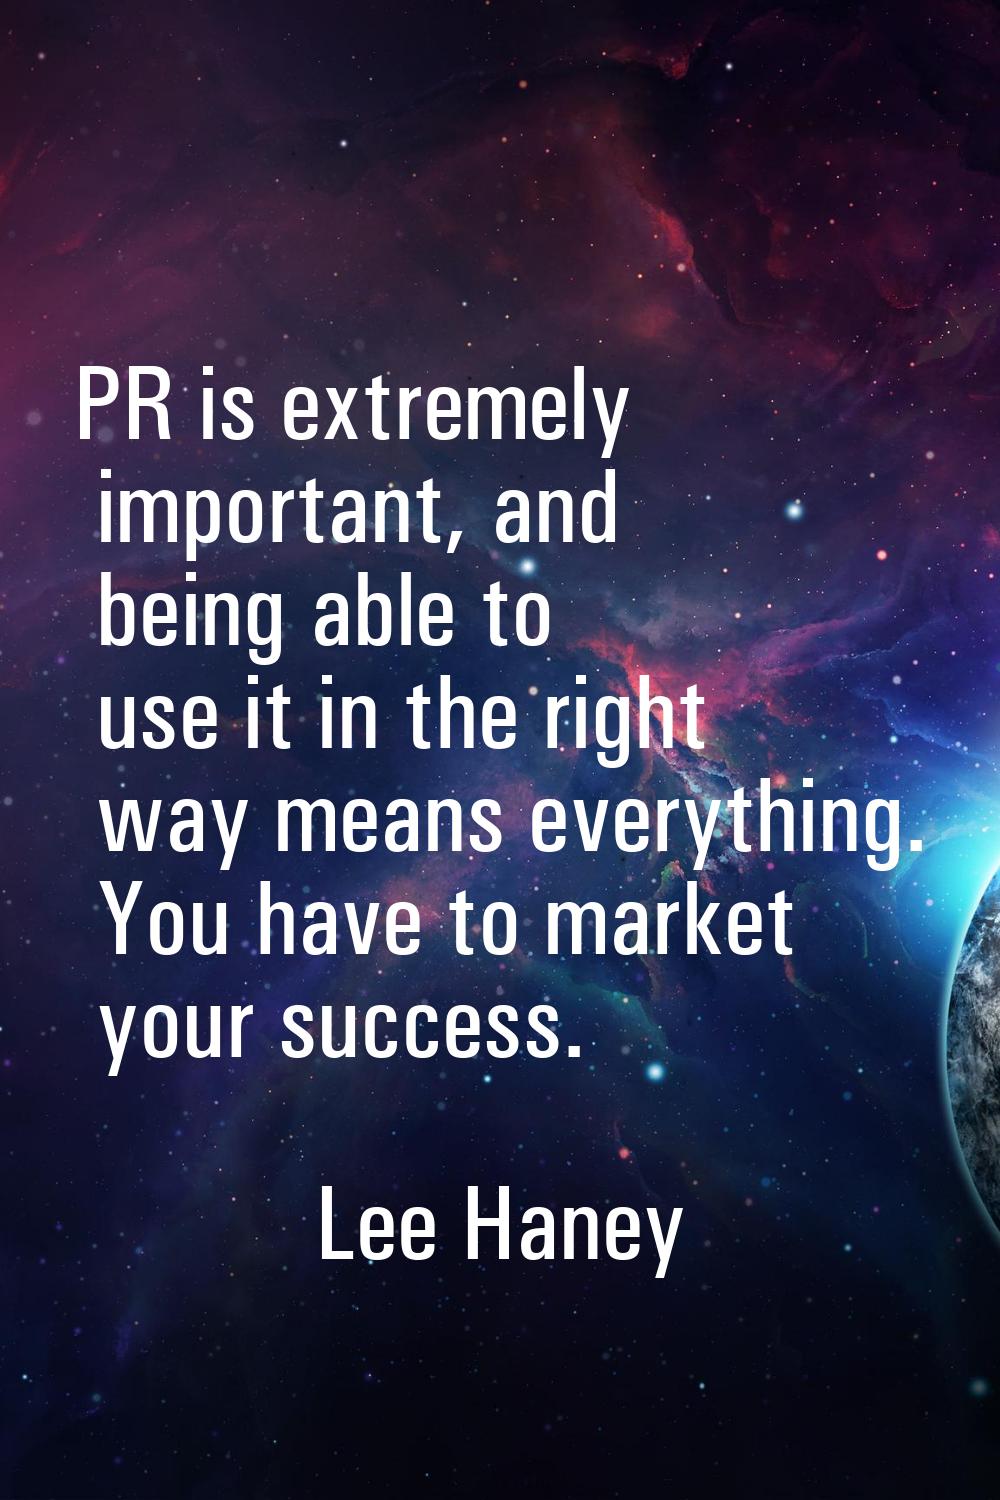 PR is extremely important, and being able to use it in the right way means everything. You have to 